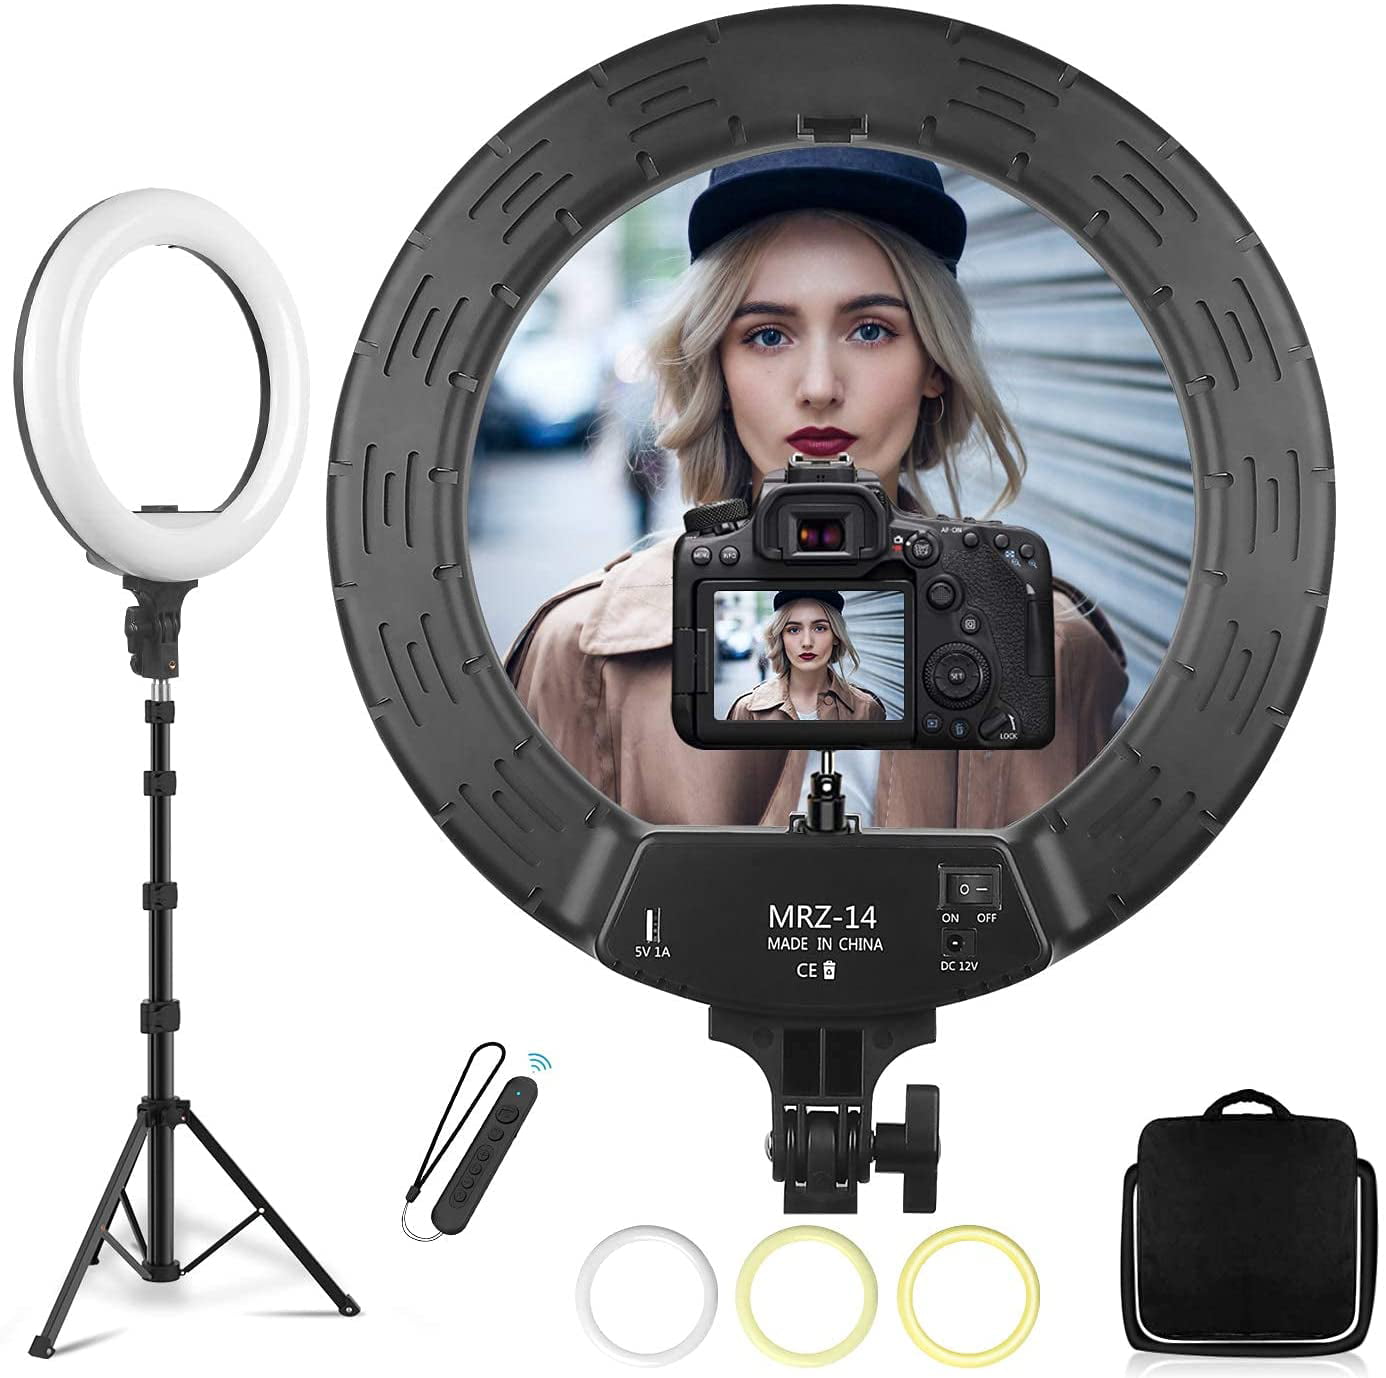 18 Selfie Ring Light for Photography/Makeup/TikTok/YouTube Video Dimmable Ring Light with Extendable Tripod Stand and Phone Holder LED Circle Lights 2.4G Wireless Remote and Multiple Lights Control 